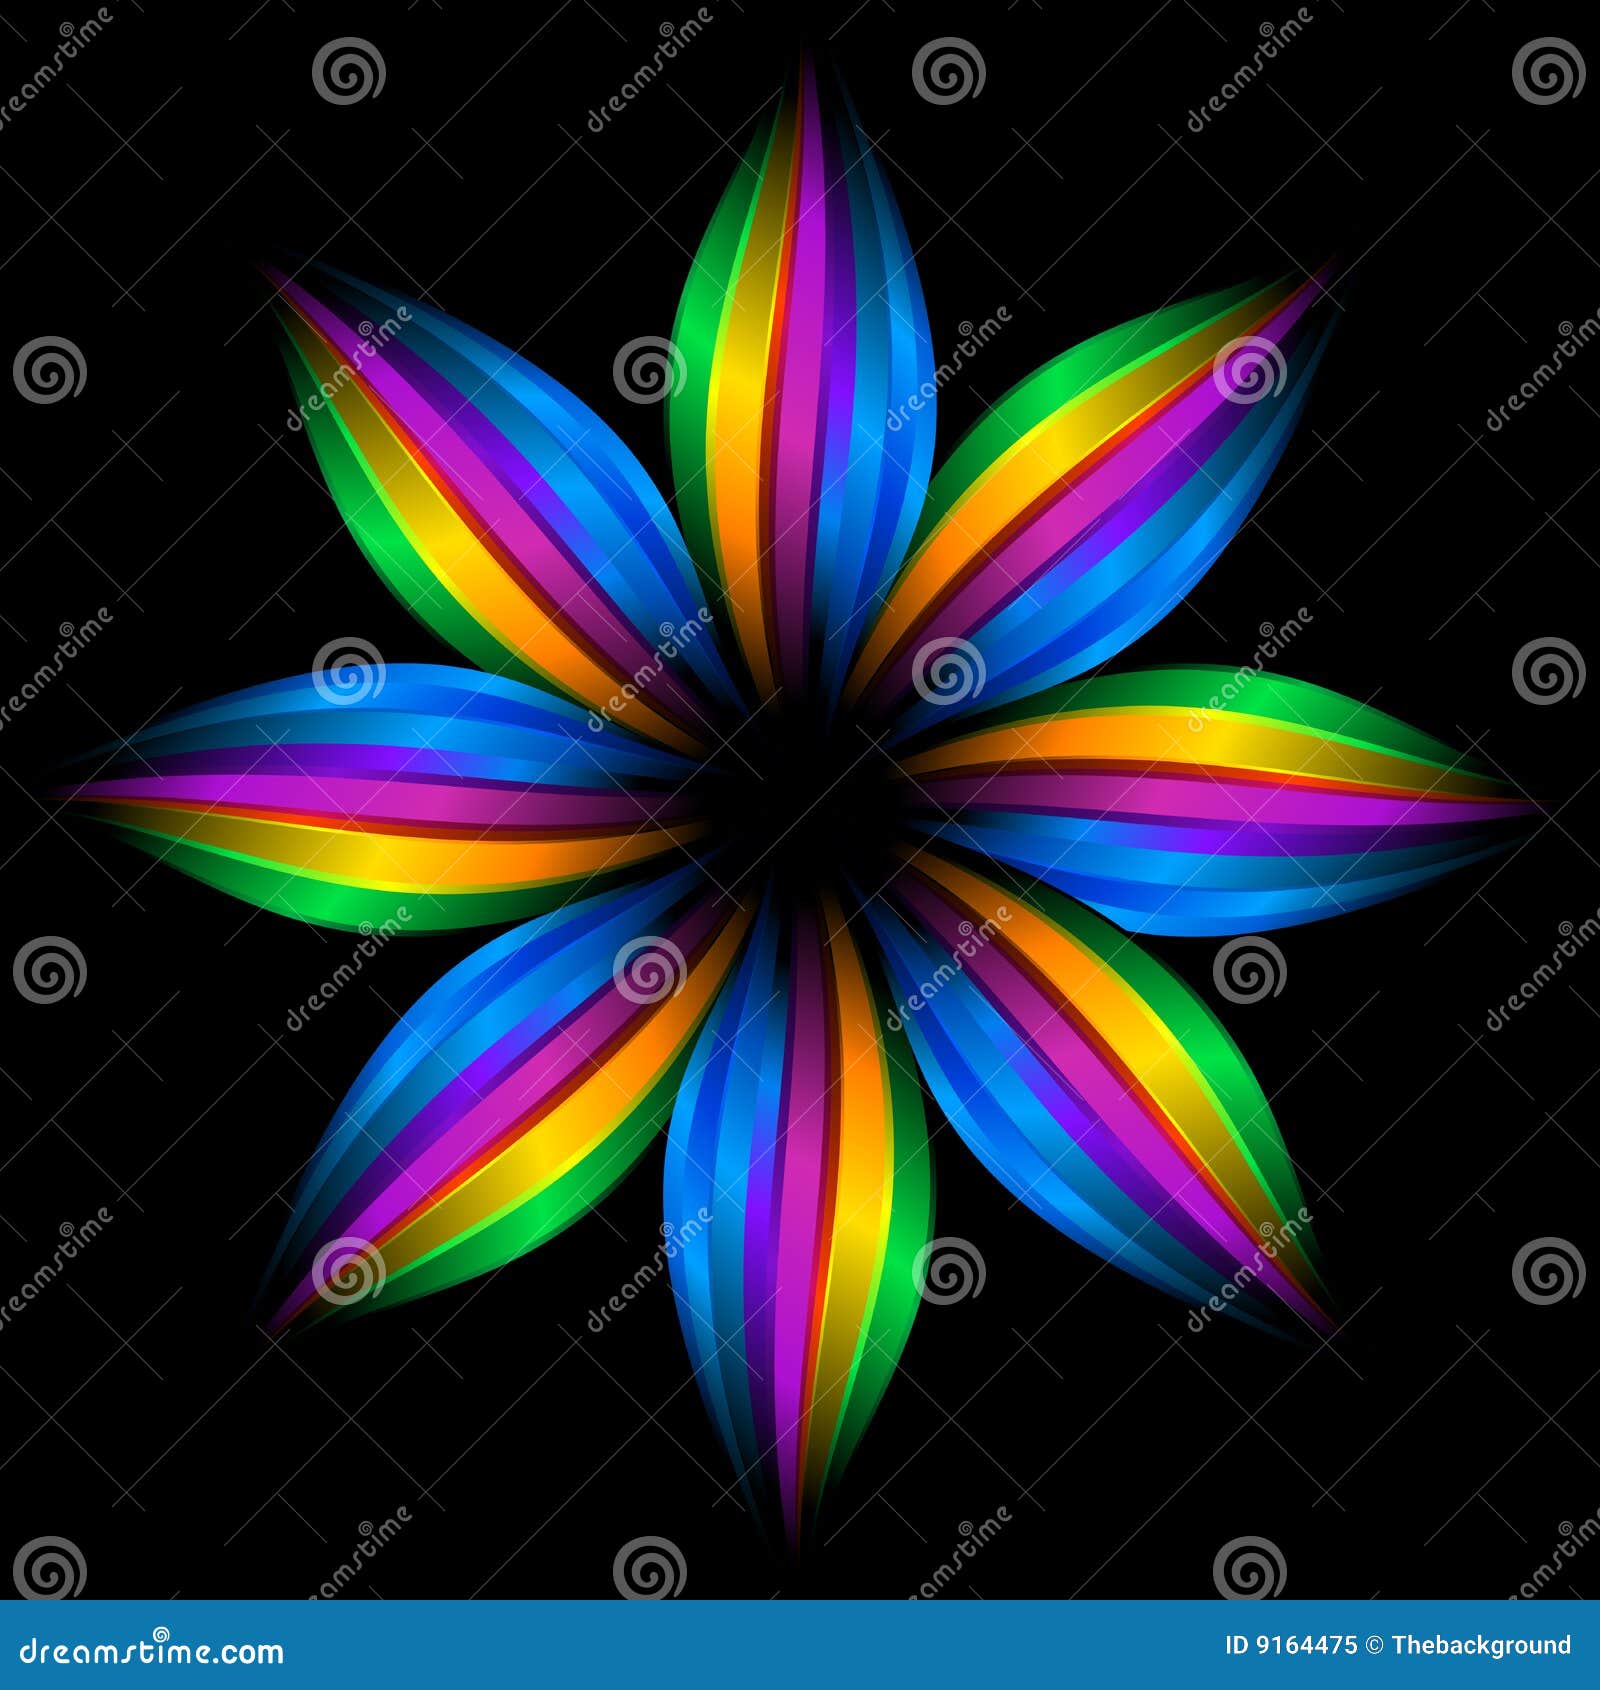 Abstract Rainbow Flower Royalty Free Stock Photo - Image: 9164475